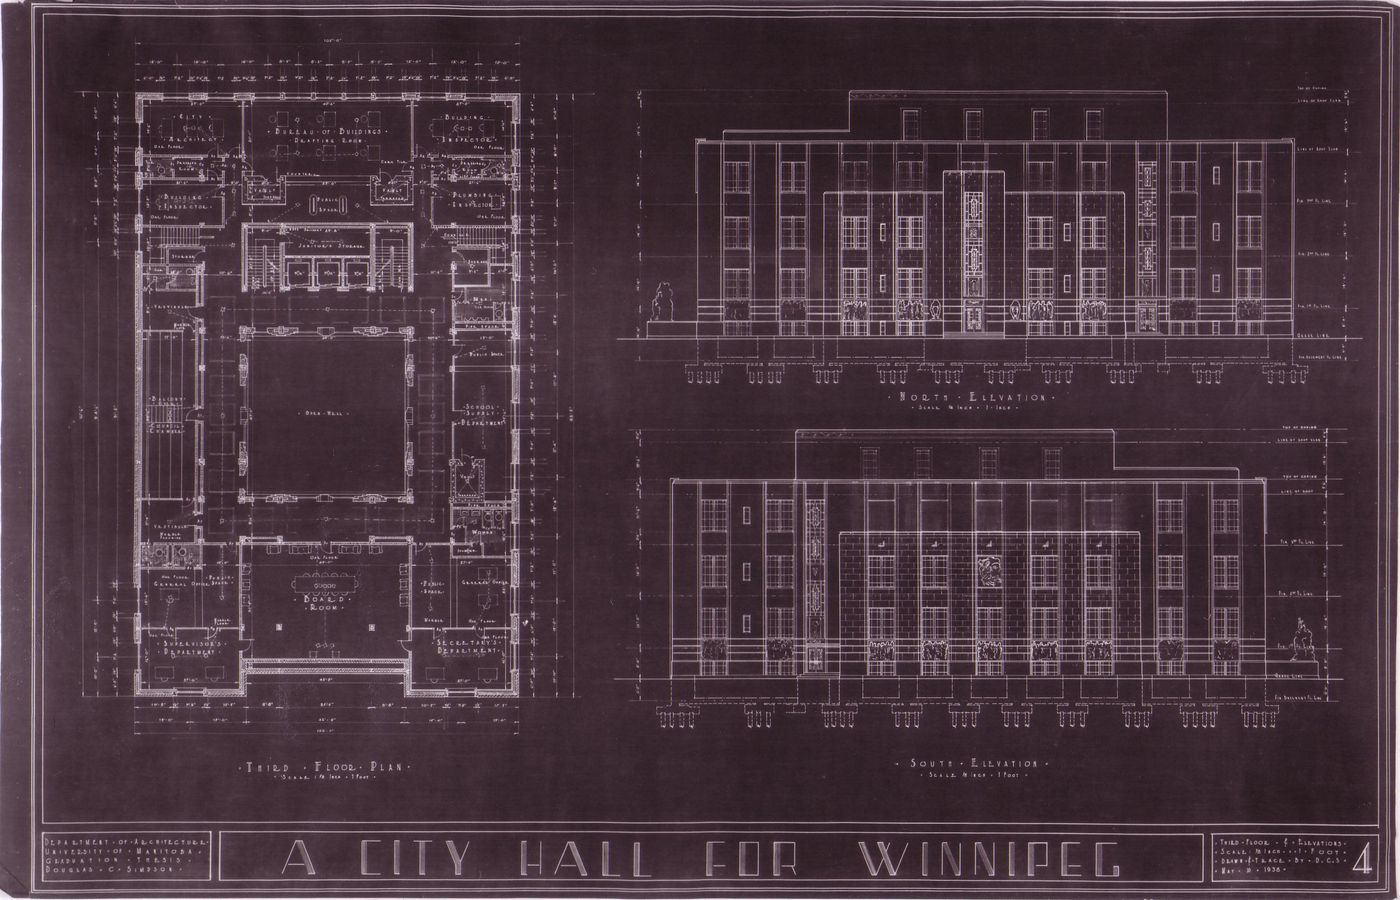 A City Hall for Winnipeg: Third floor and elevations